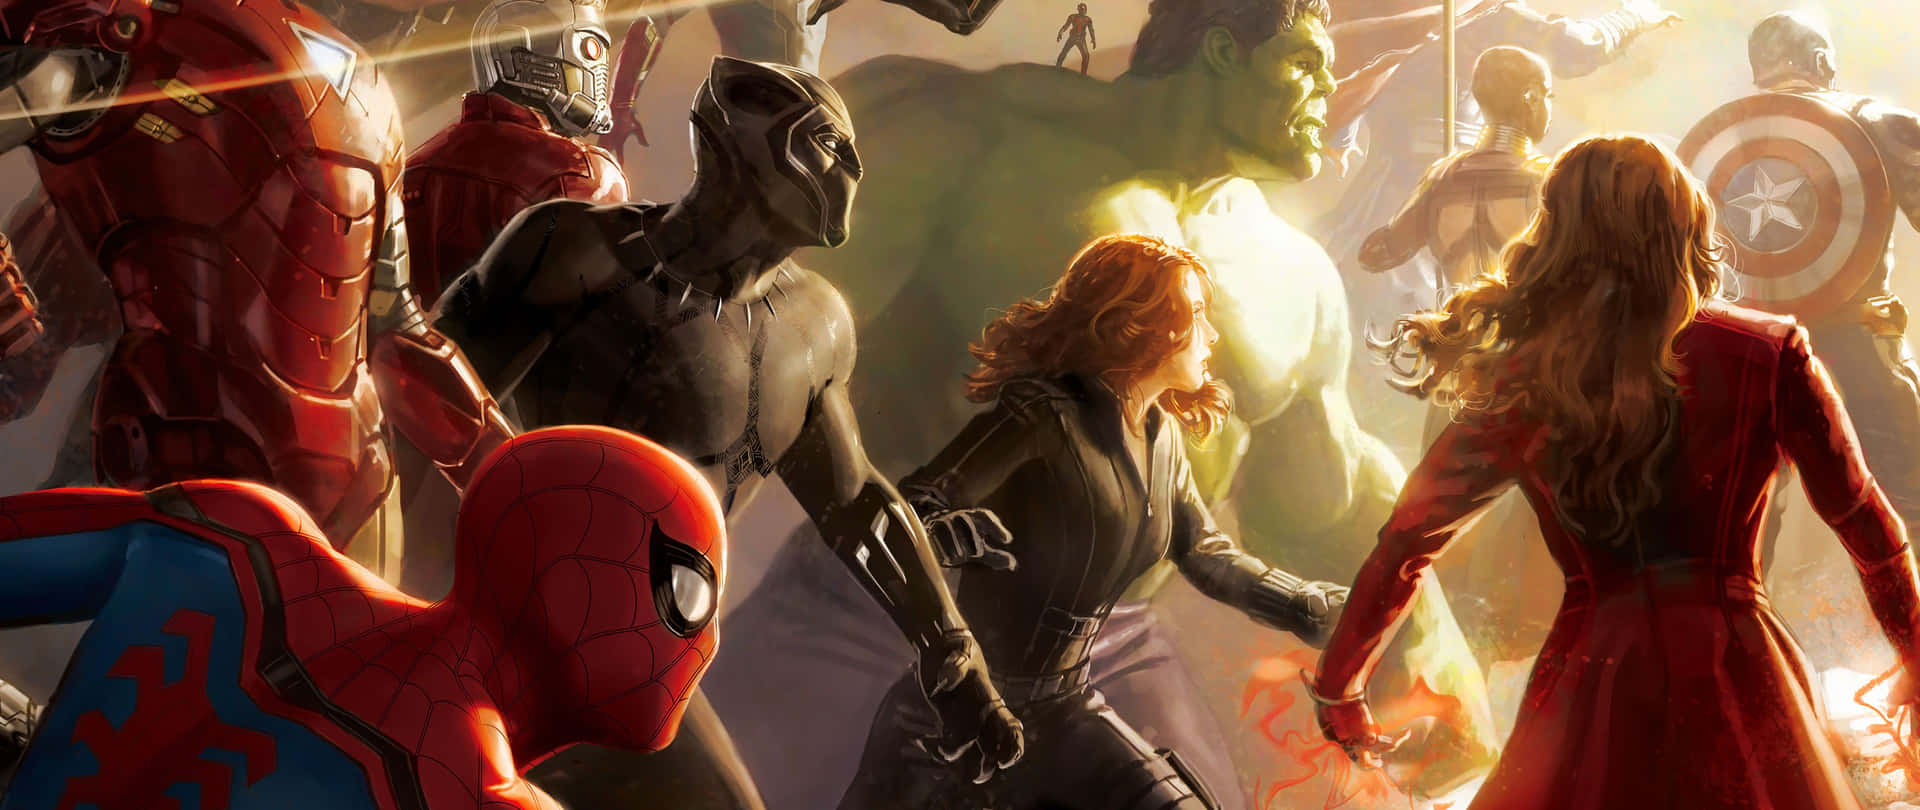 Get Ready to Game with the Avengers Laptop Wallpaper